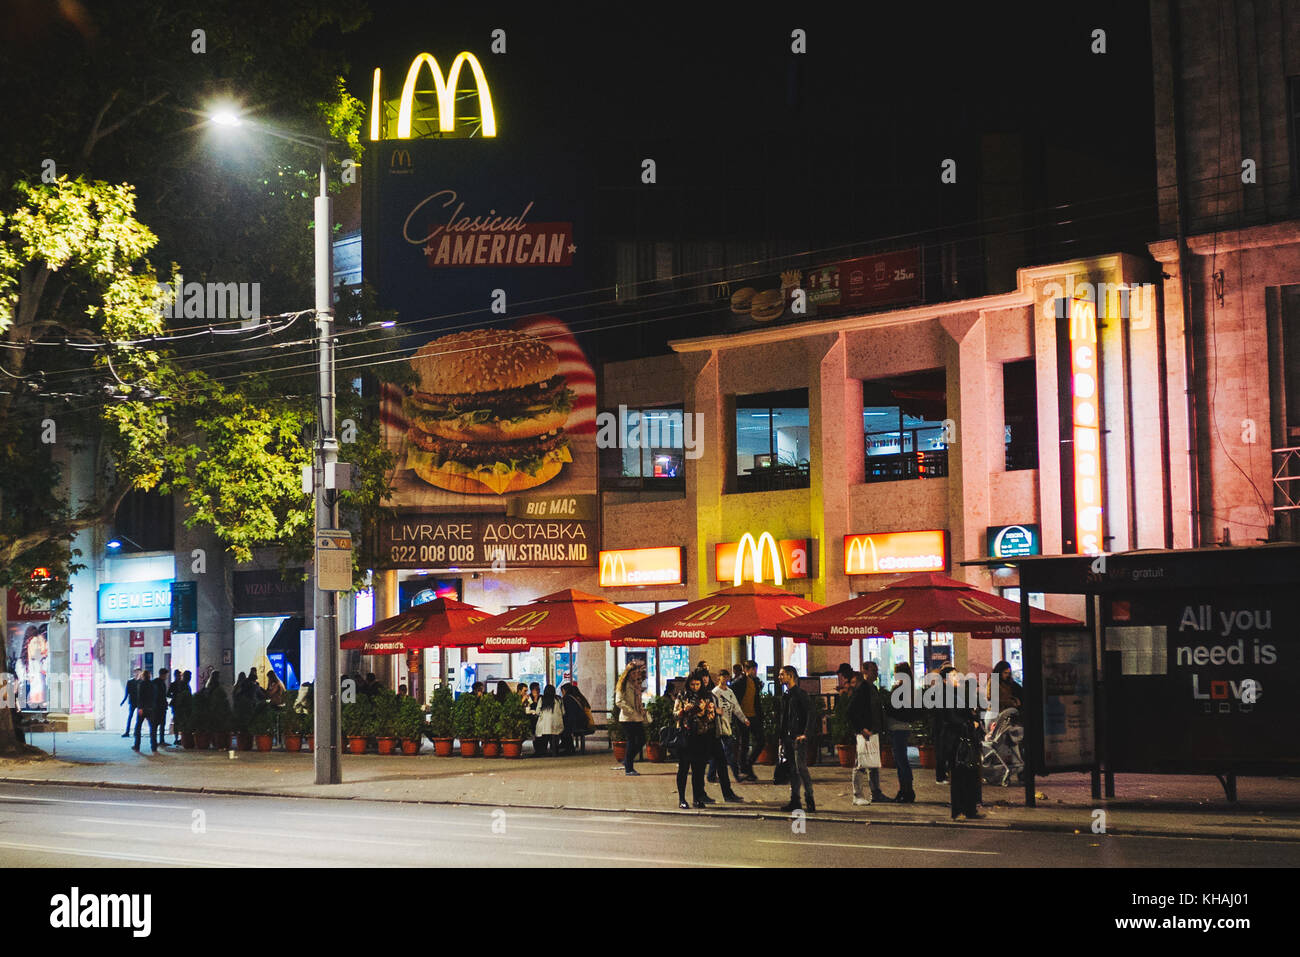 One of the few McDonald's restaurants in Chisinau, Moldova, advertises a 'Classical American' Big Mac while patrons sit in front eating fast food Stock Photo